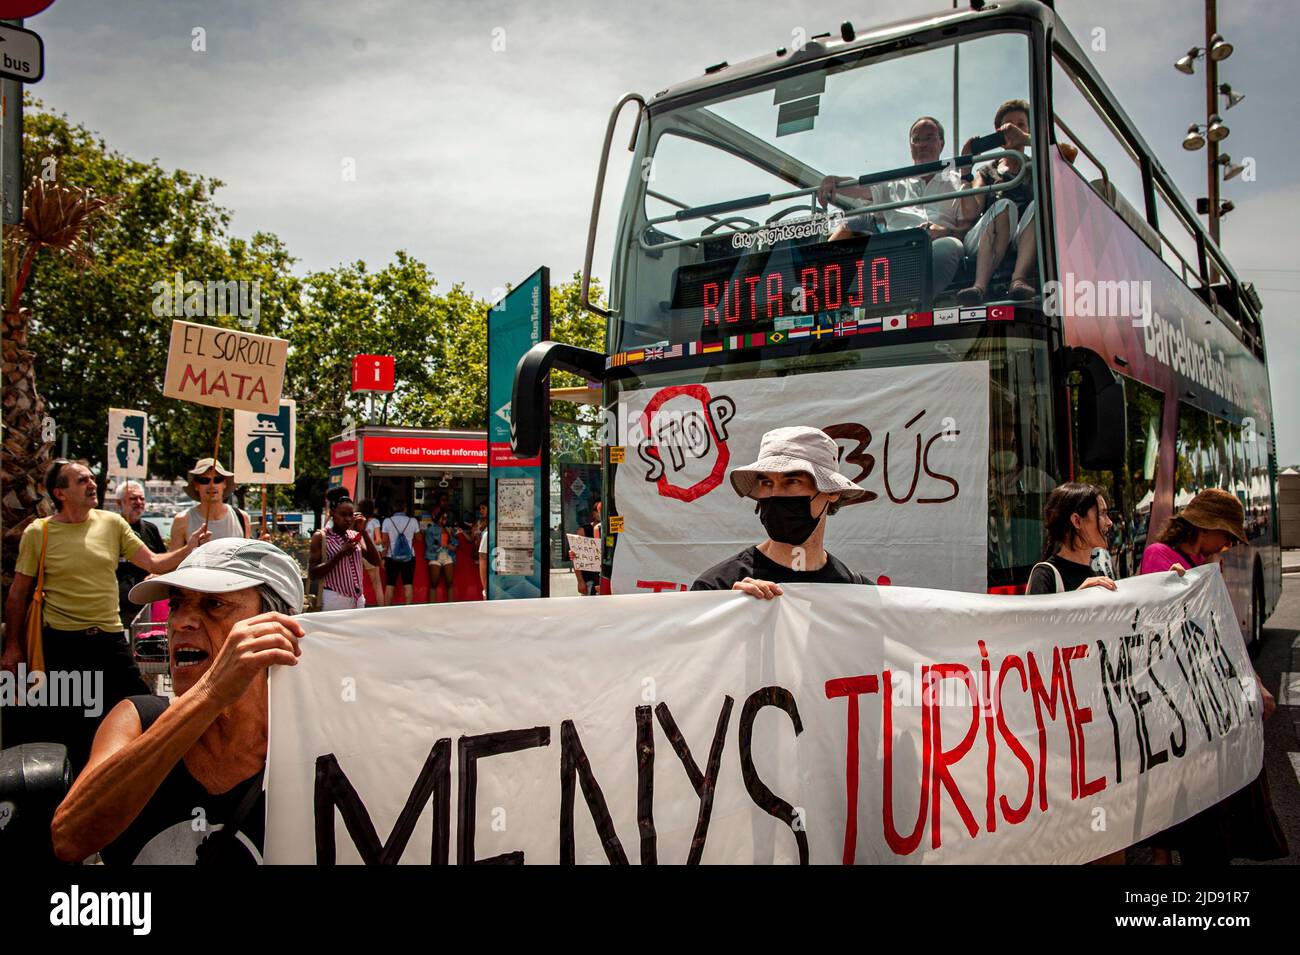 Barcelona residents block a tourist bus on route during a protest against mass tourism in the city. Stock Photo